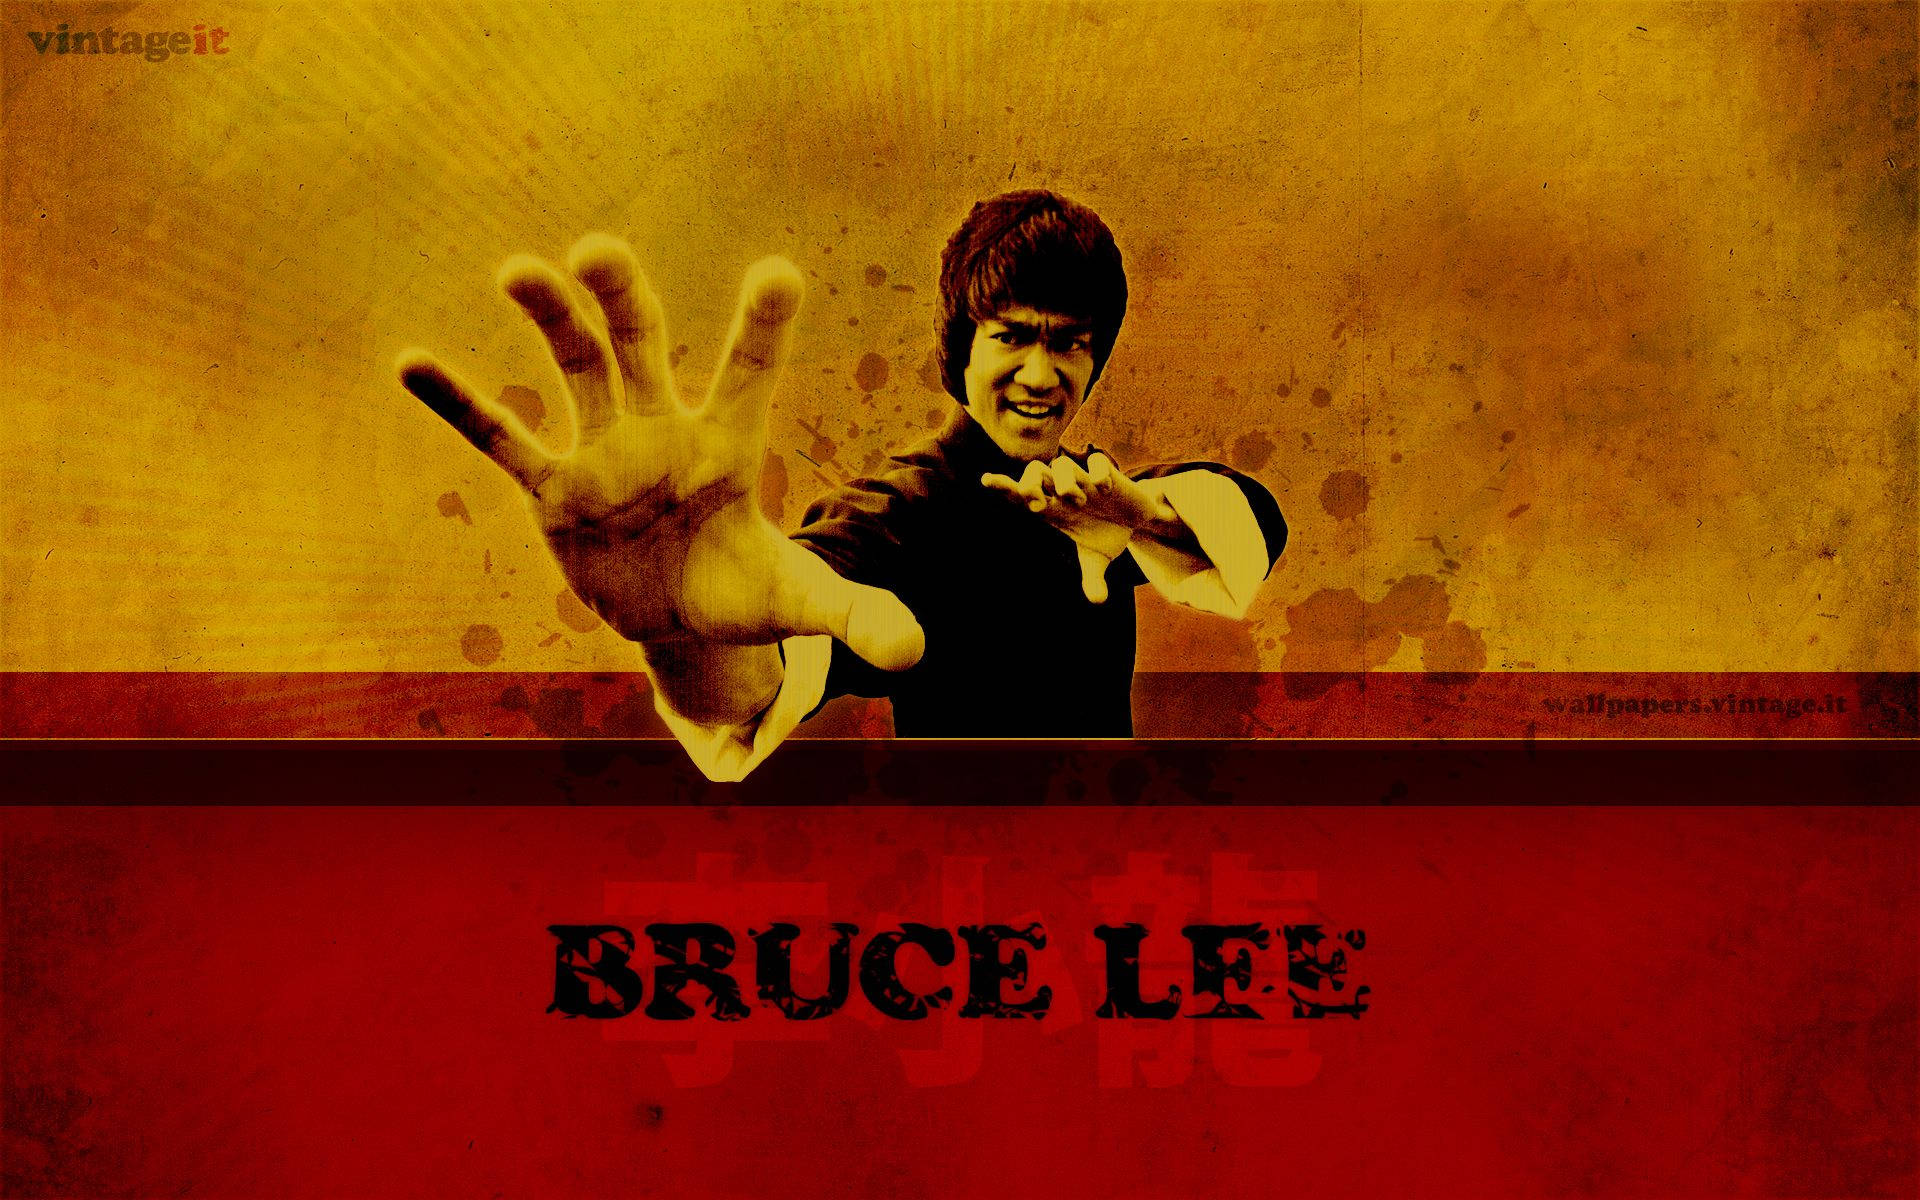 Bruce Lee practicing the iconic one-inch punch Wallpaper